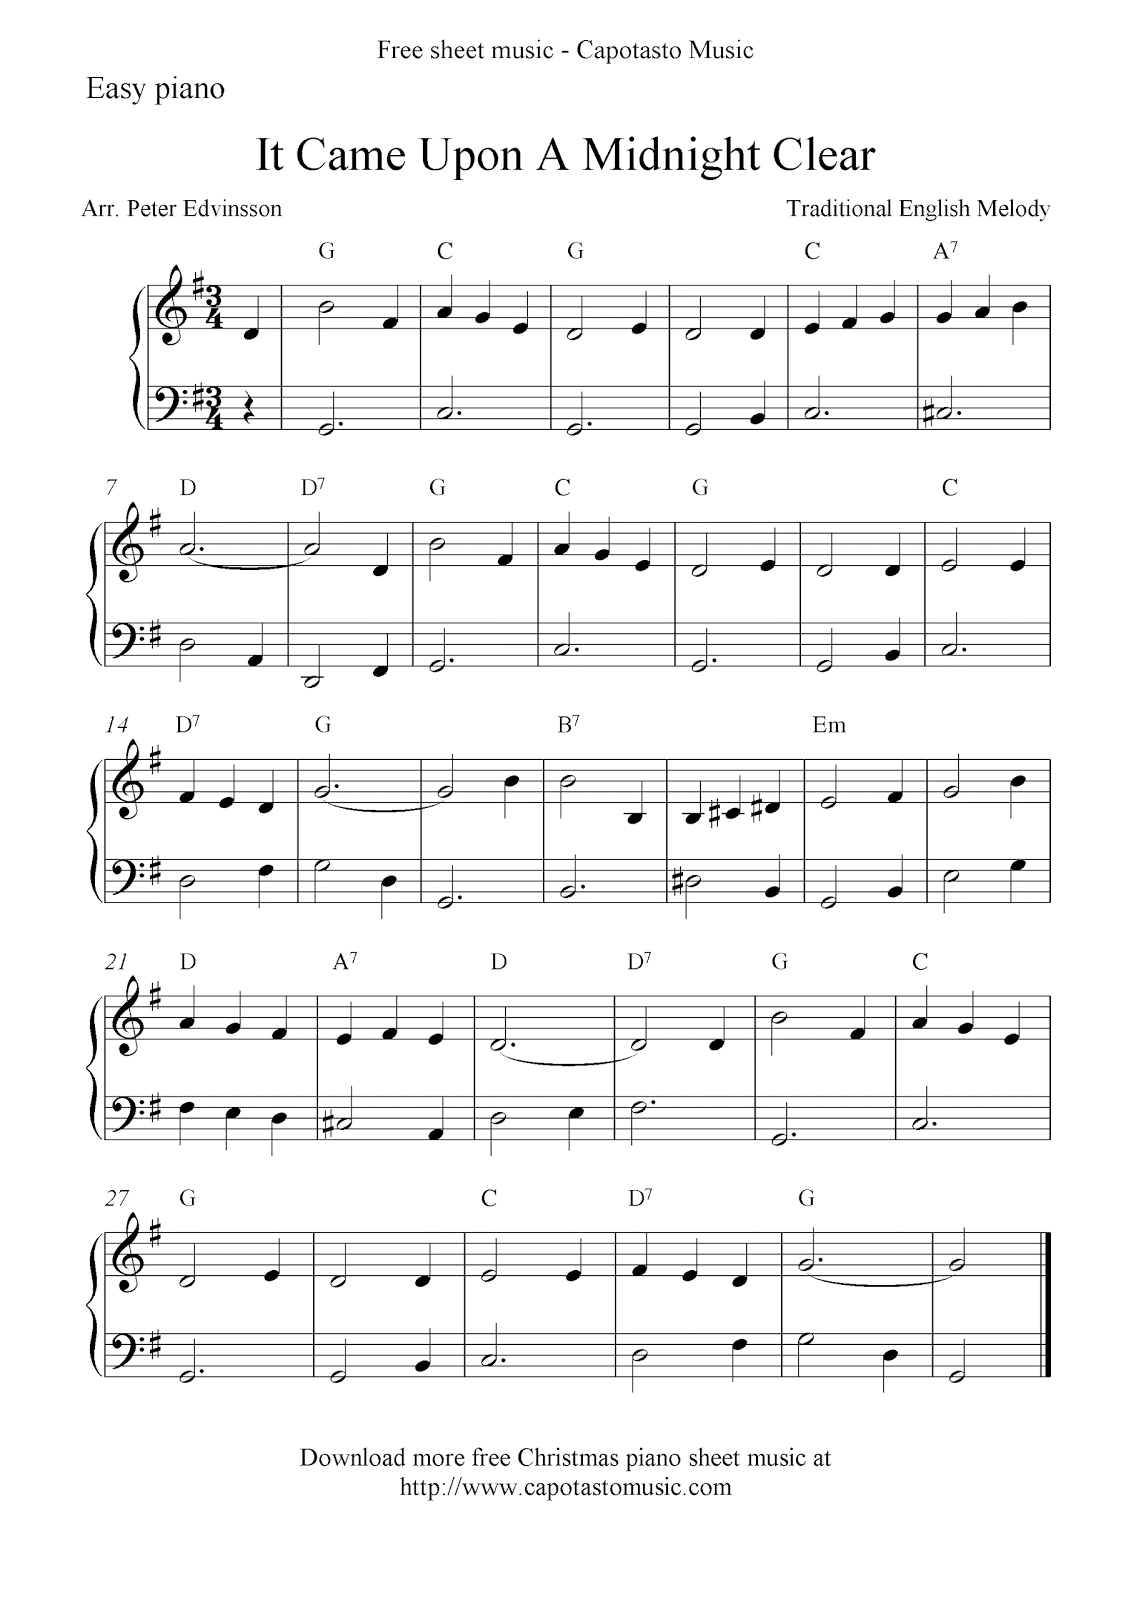 Free Christmas Piano Sheet Music Notes, It Came Upon A Midnight Clear - Free Printable Christmas Sheet Music For Piano